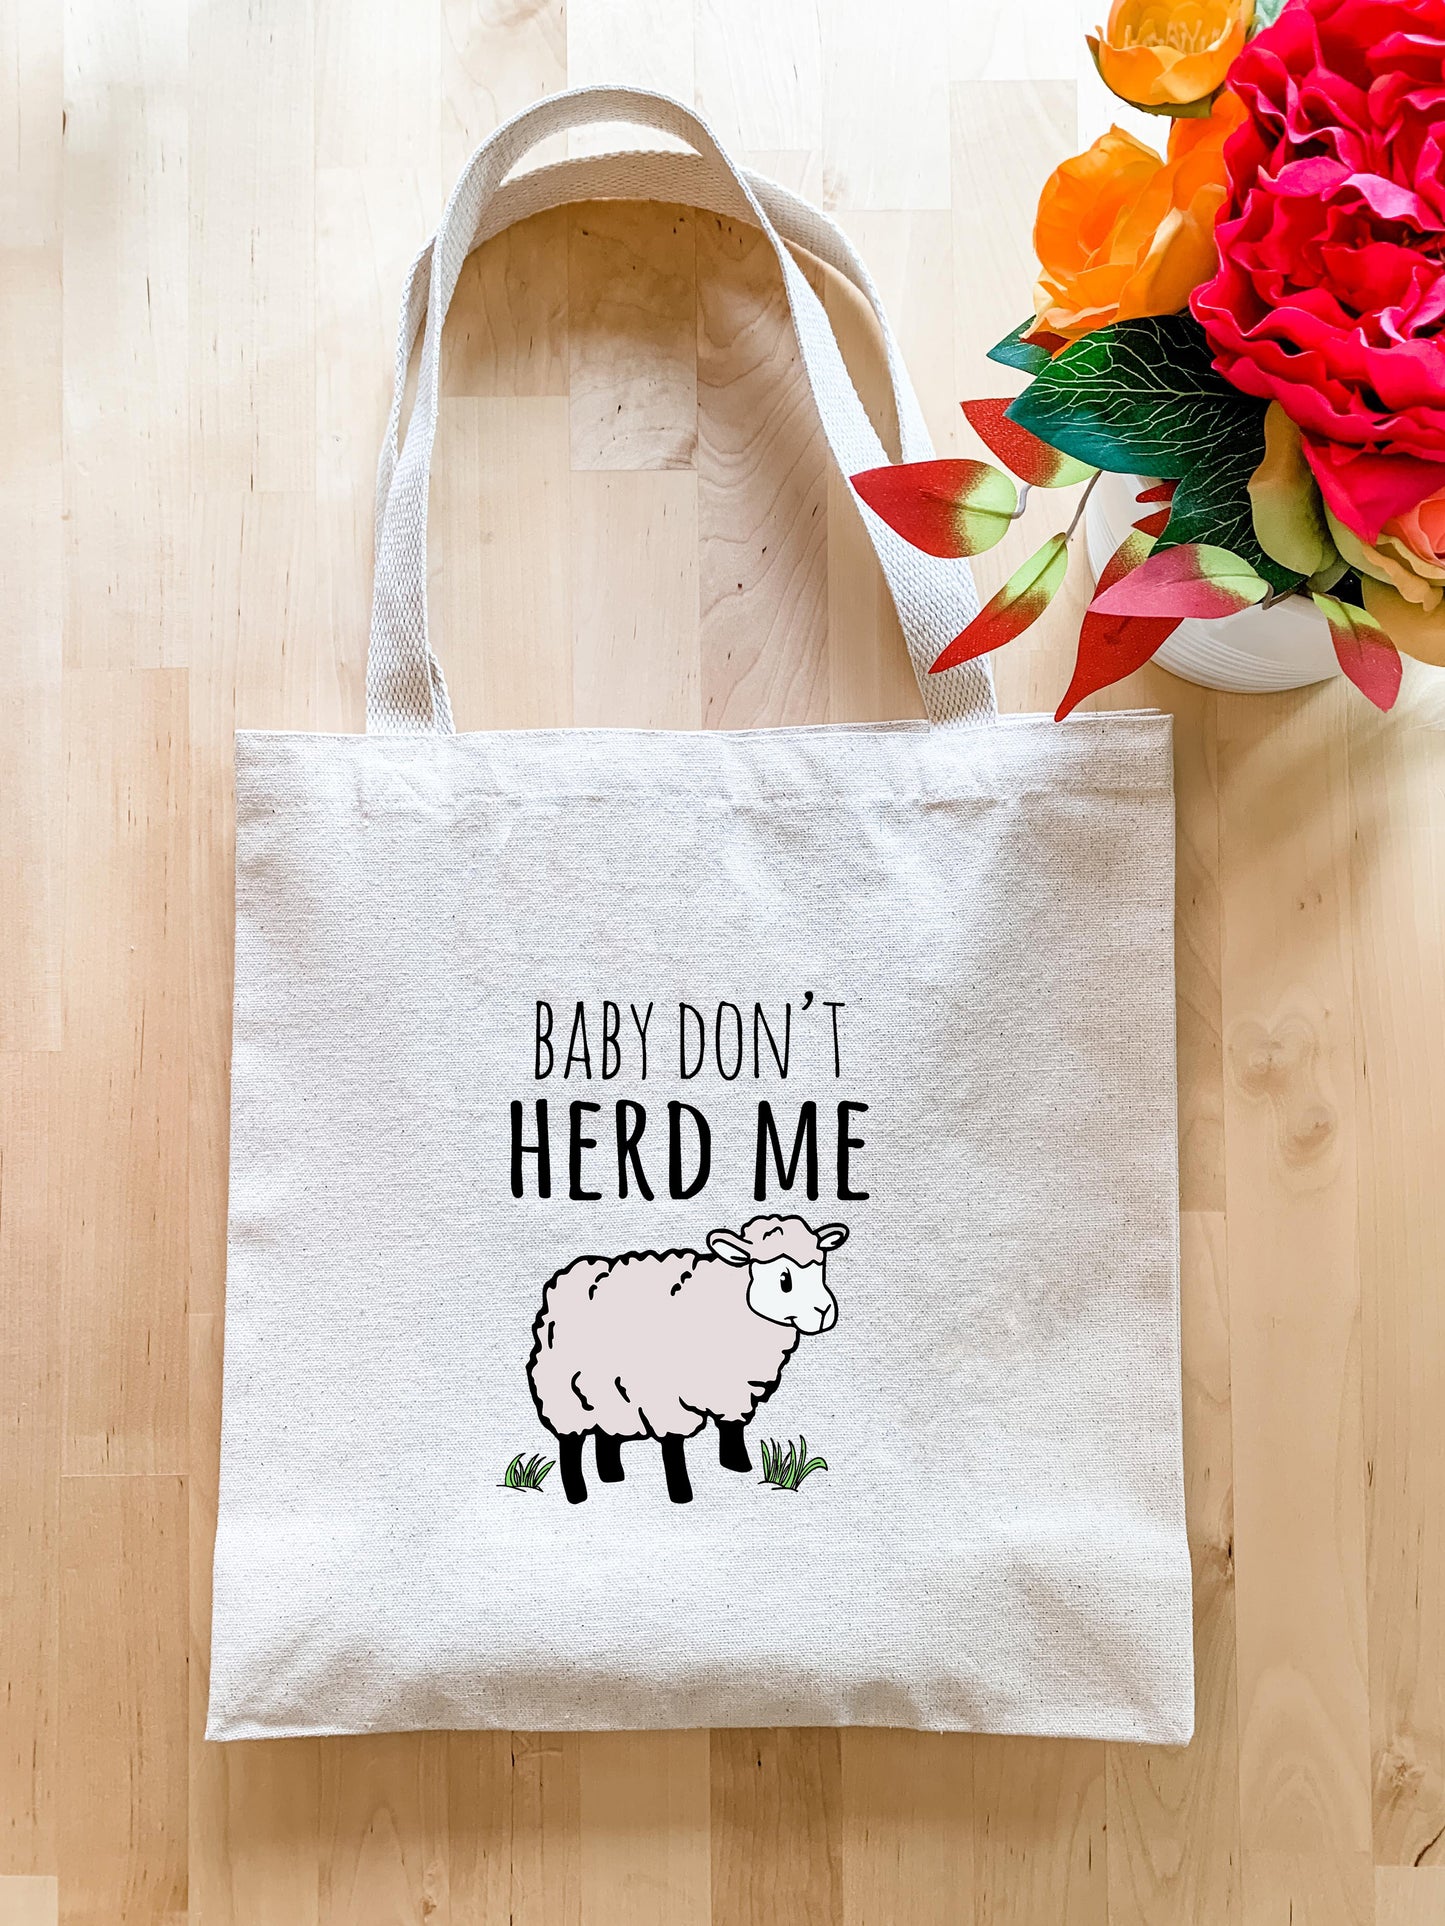 a tote bag with a picture of a sheep on it